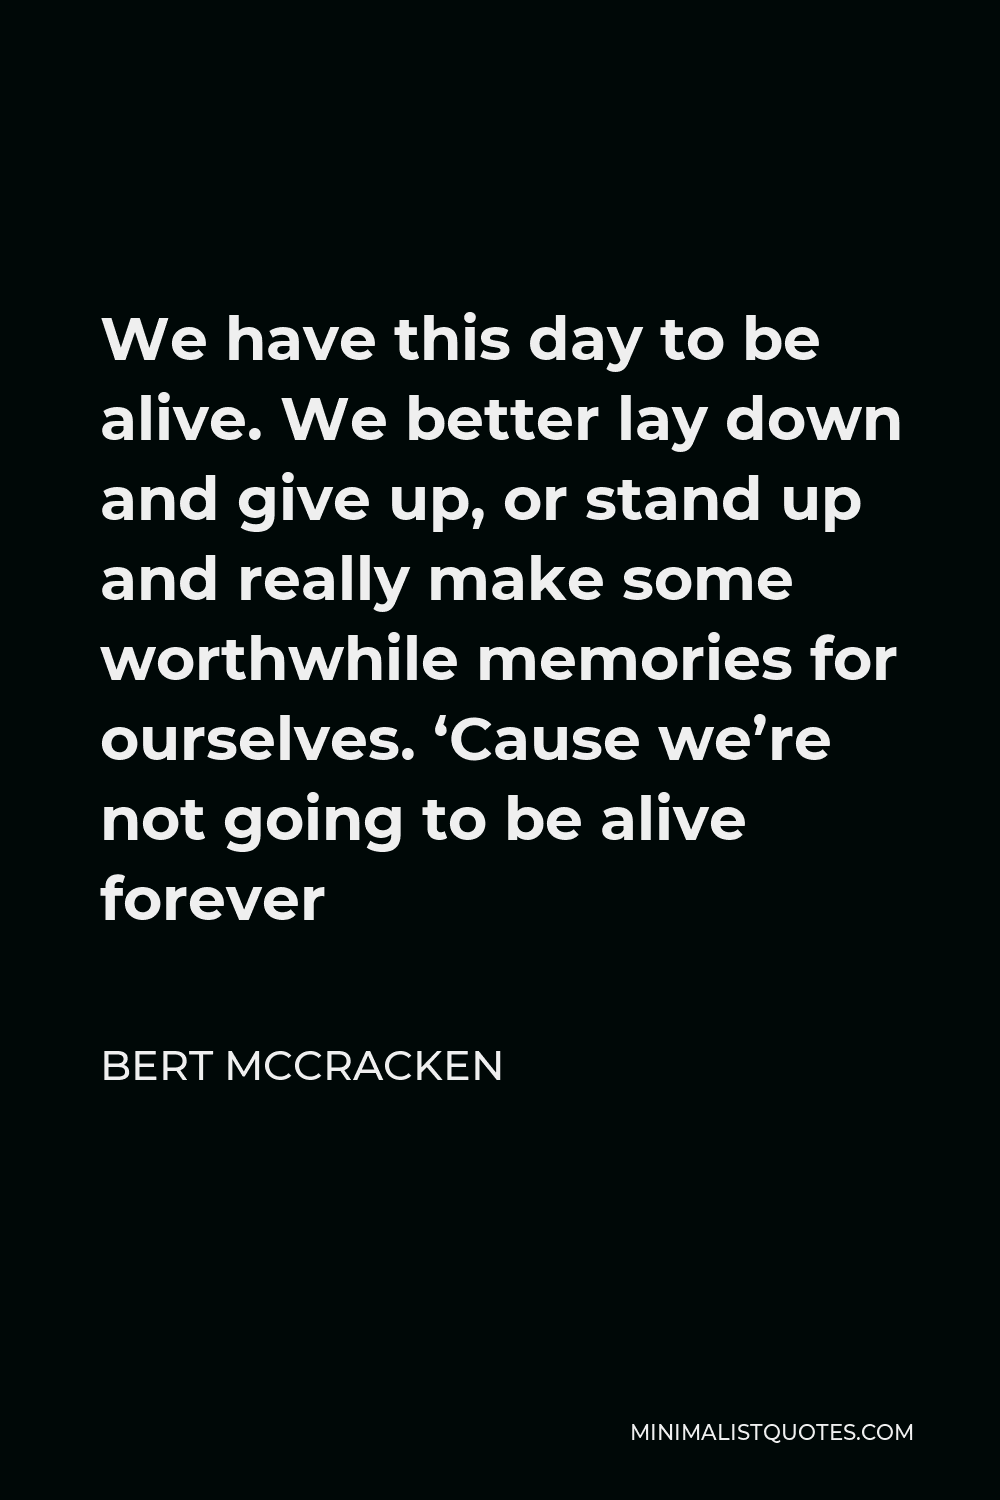 Bert McCracken Quote - We have this day to be alive. We better lay down and give up, or stand up and really make some worthwhile memories for ourselves. ‘Cause we’re not going to be alive forever